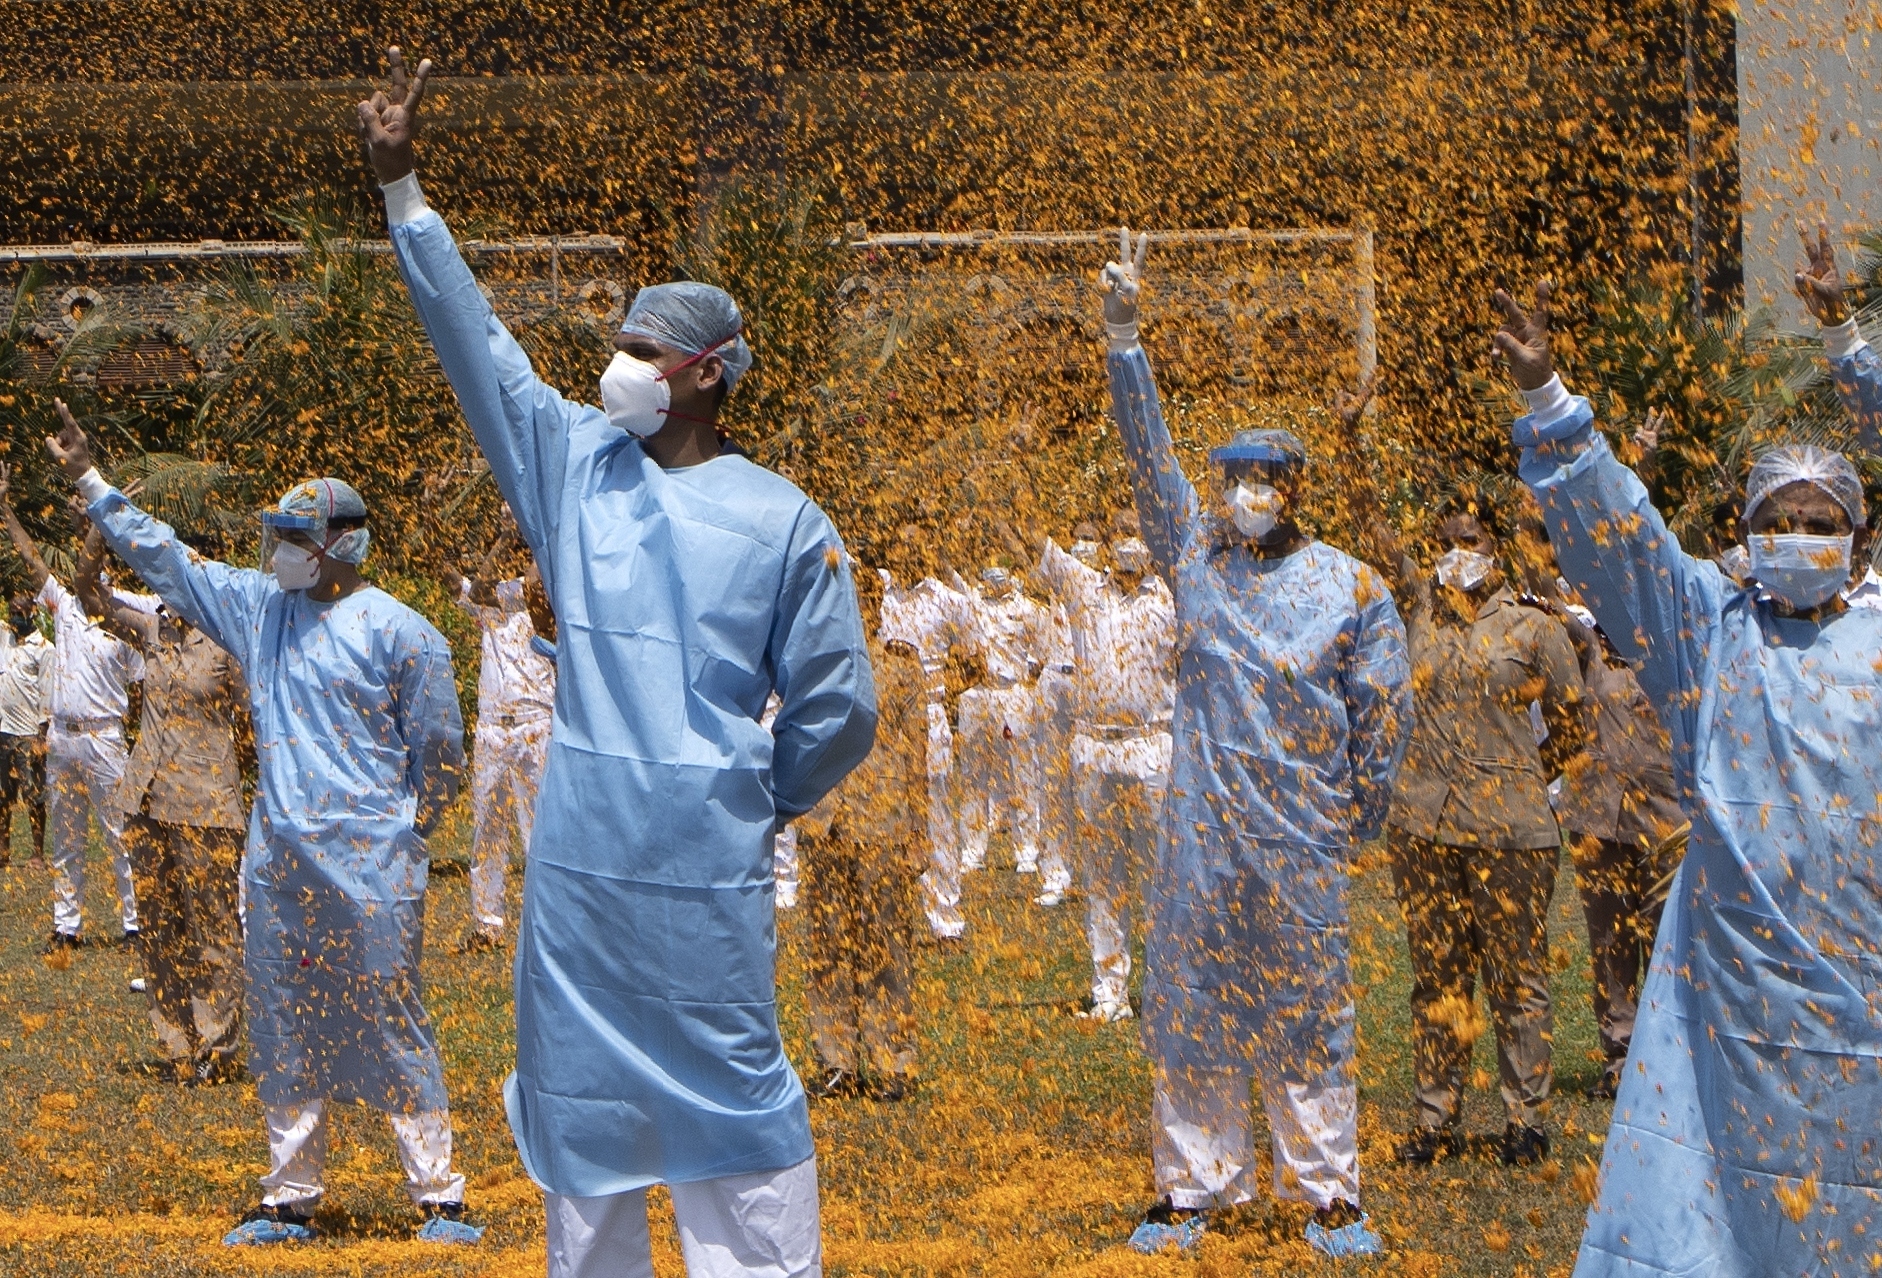 An Indian Air Force helicopter showers flower petals on the staff of INS Asvini hospital in Mumbai, India, Sunday, May 3, 2020. The event was part the Armed Forces' efforts to thank the workers, including doctors, nurses and police personnel, who have been at the forefront of the country's battle against the COVID-19 pandemic. Photo: AP